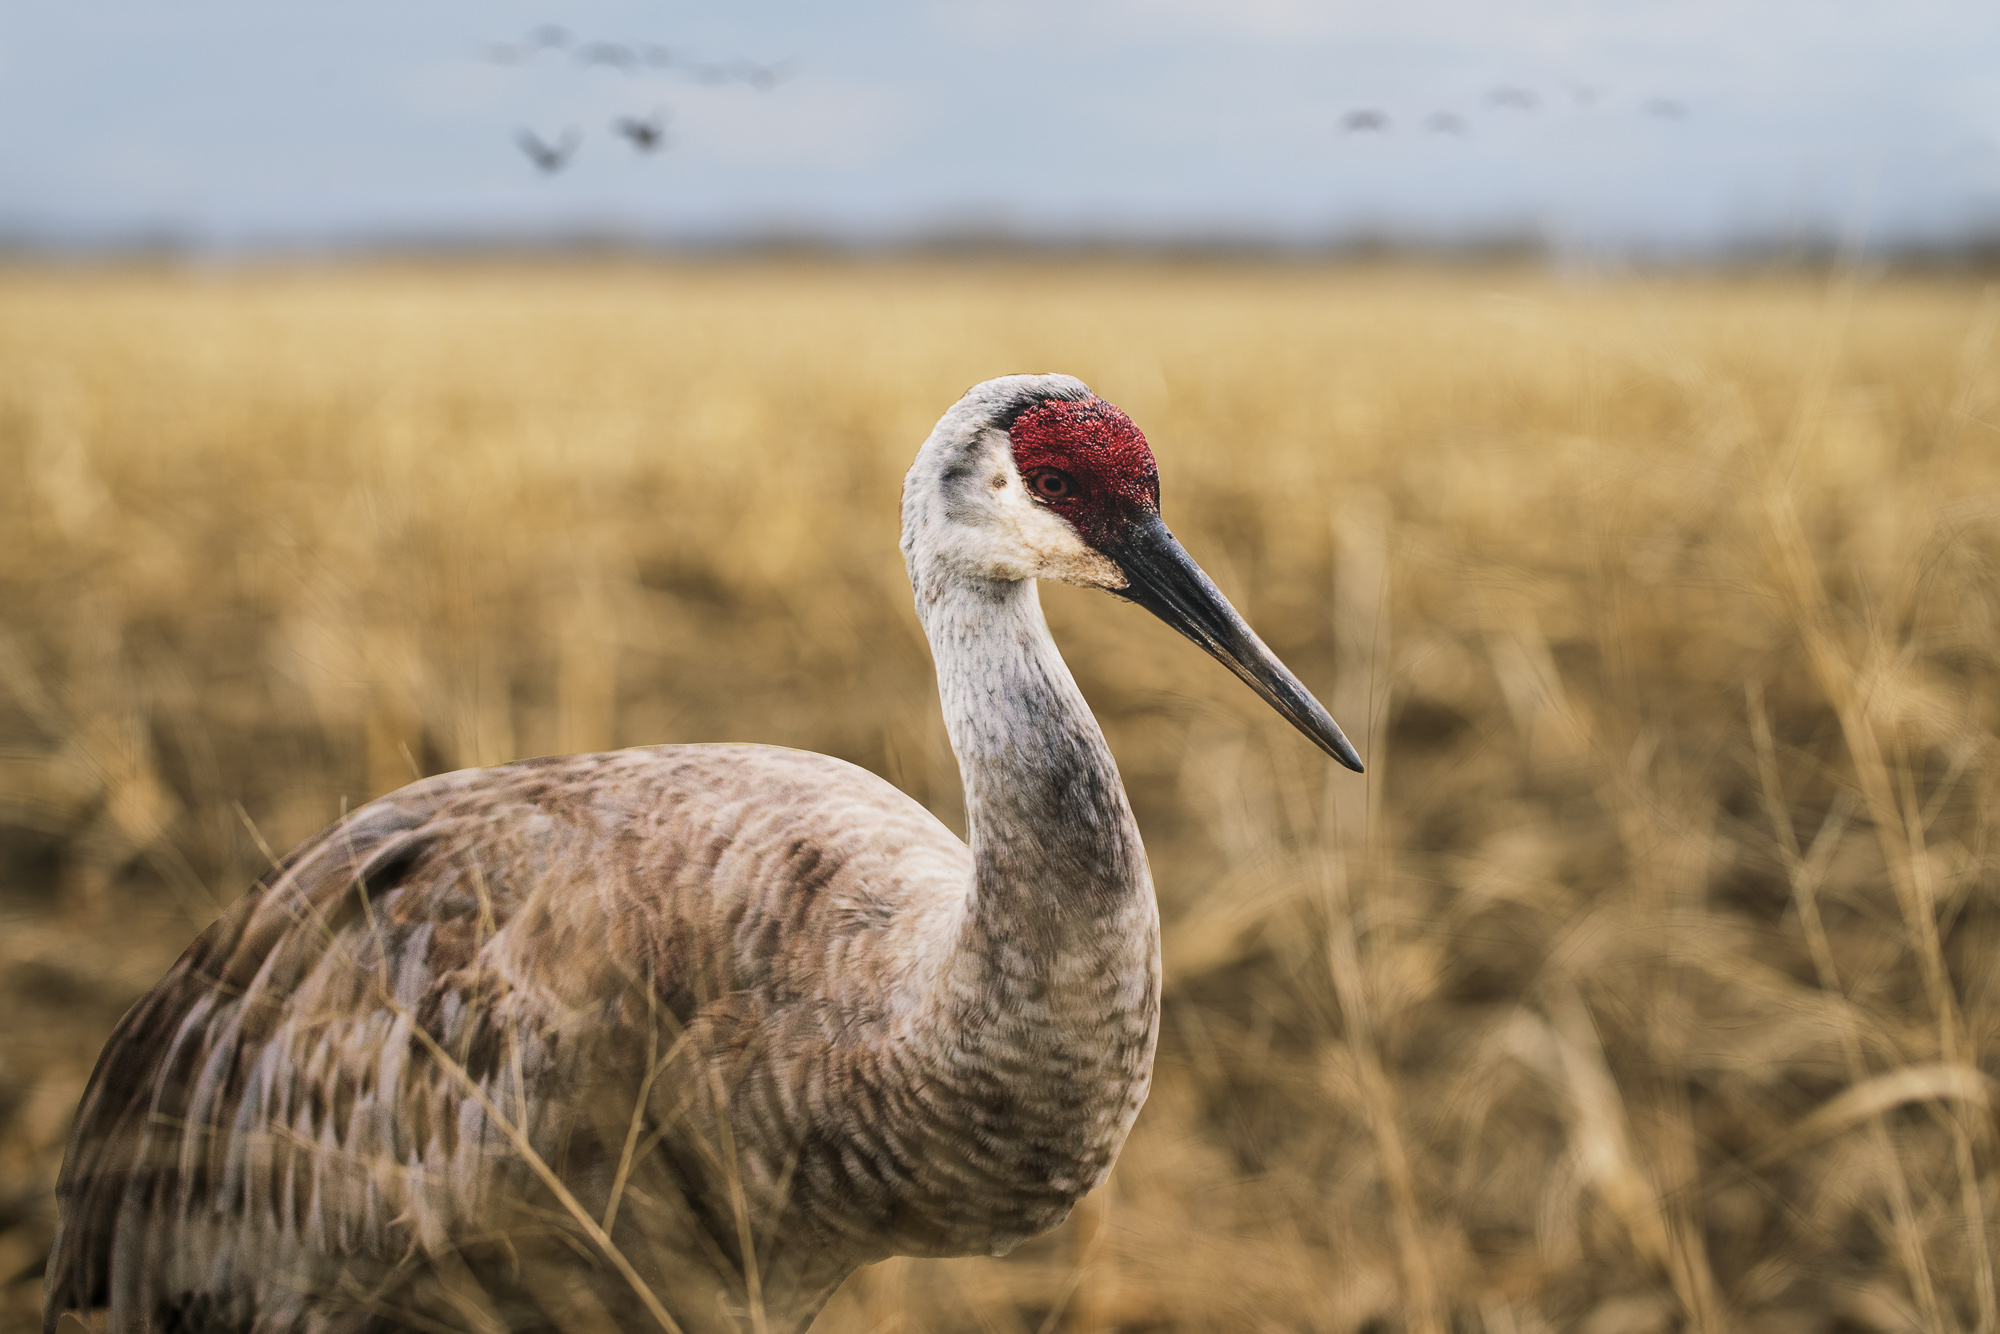 A paper cutout of a photograph of the top half of a Sandhill Crane placed in harvested cornfield. In the distant background are out-of-focus real migrating Sandhill Cranes.